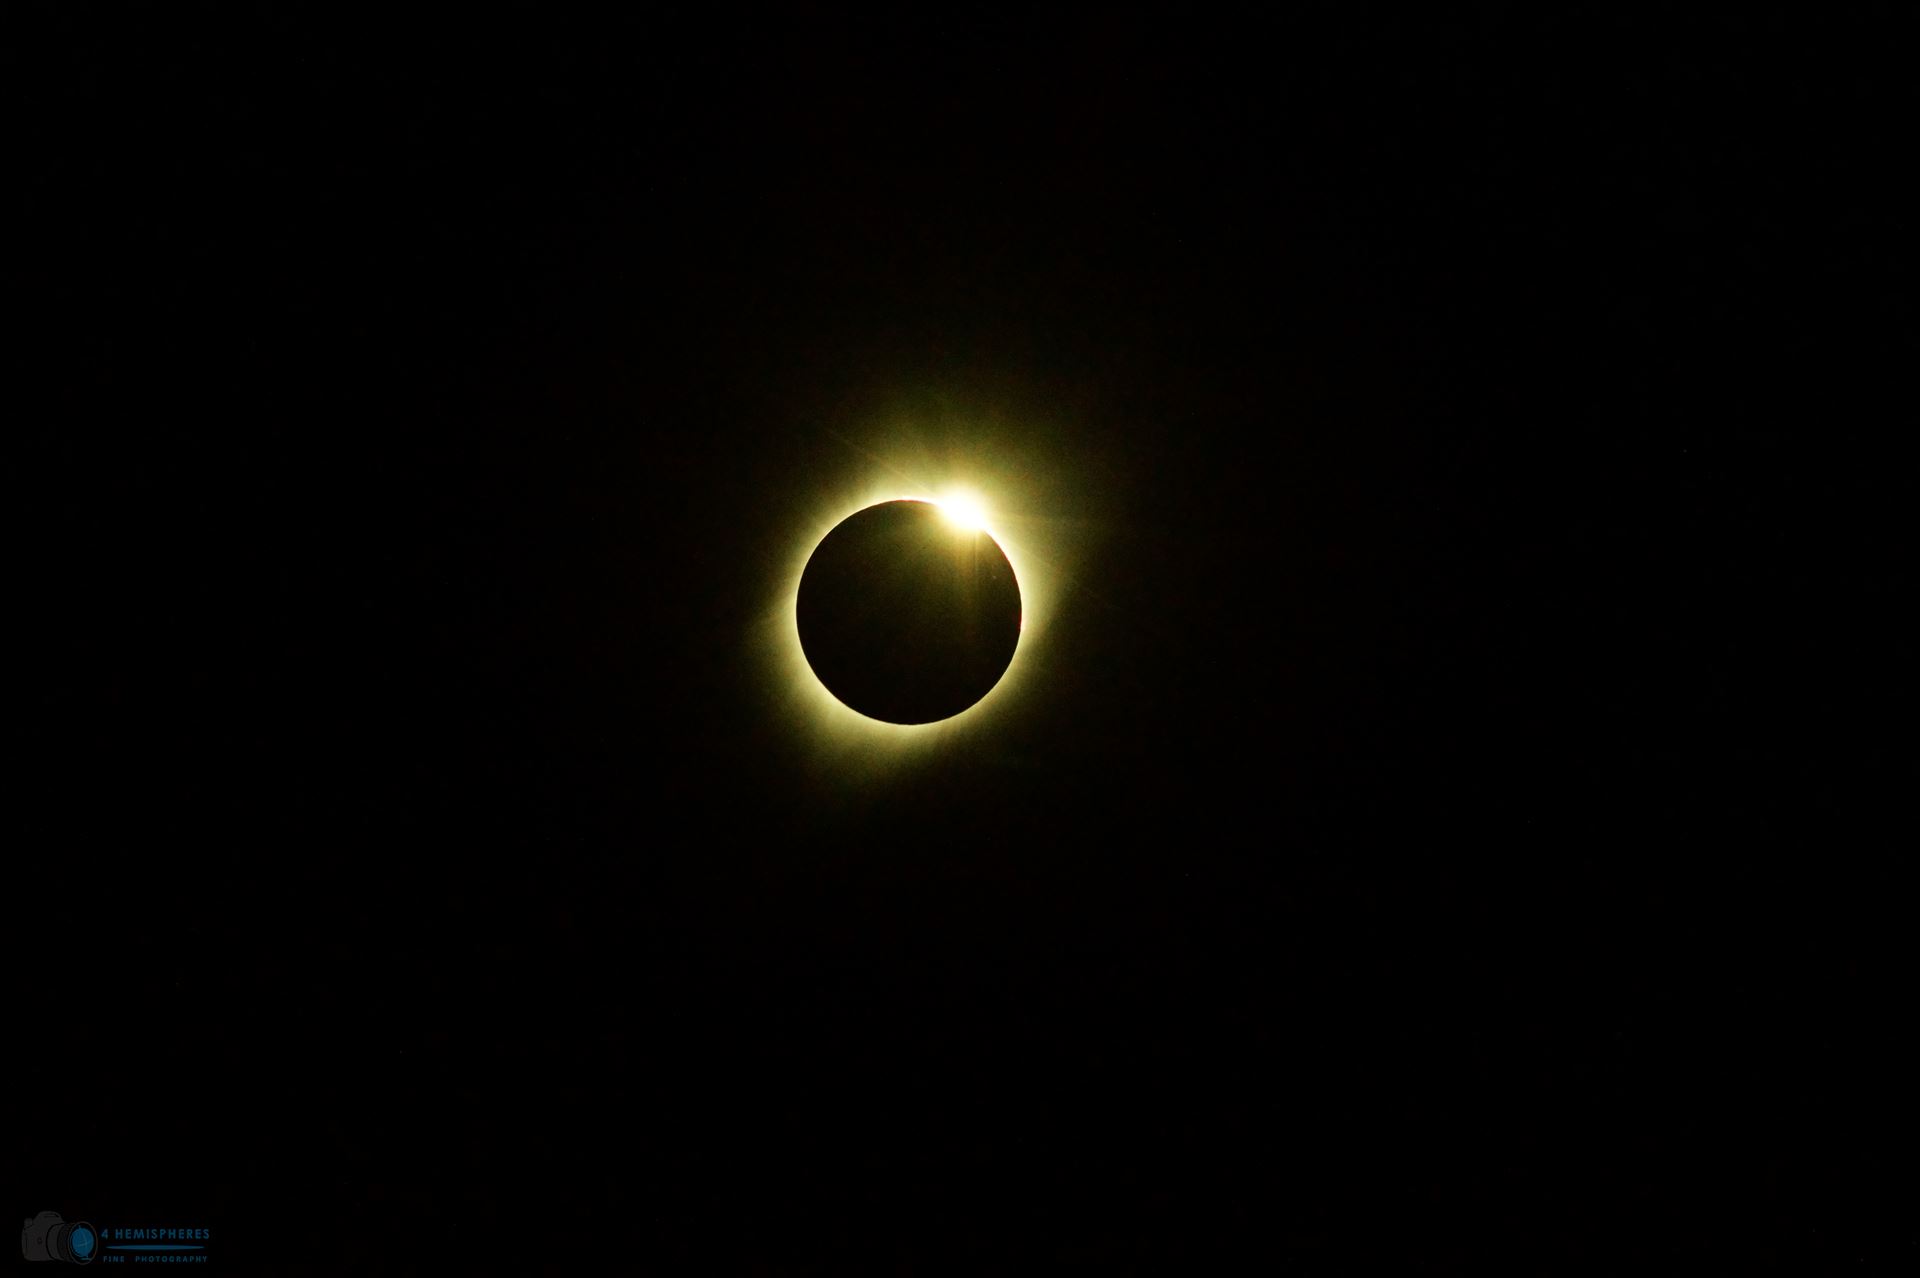 First Diamond First glimpse of the diamond ring as the totality ends. by 4 Hemispheres Photography